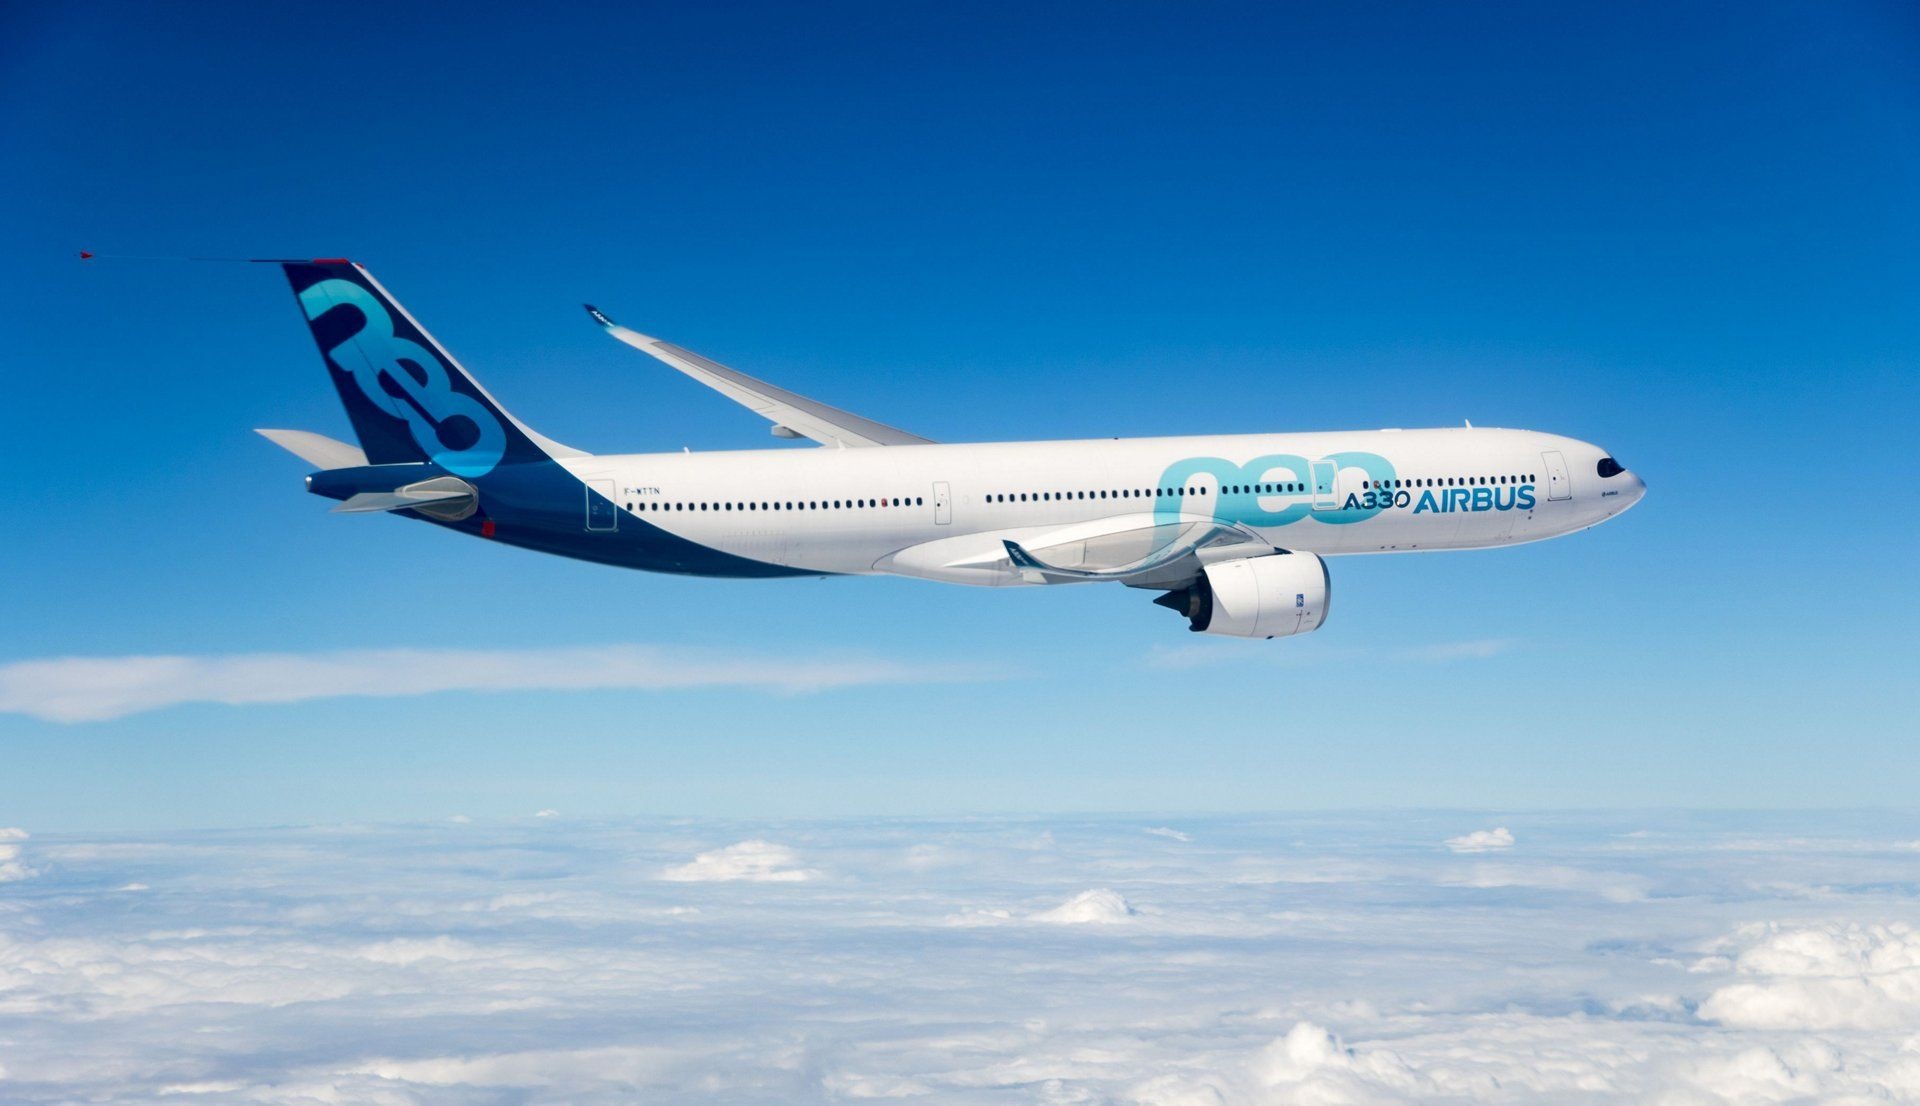 Airbus A330 Wallpapers - Top Free Airbus A330 Backgrounds 1920x1110